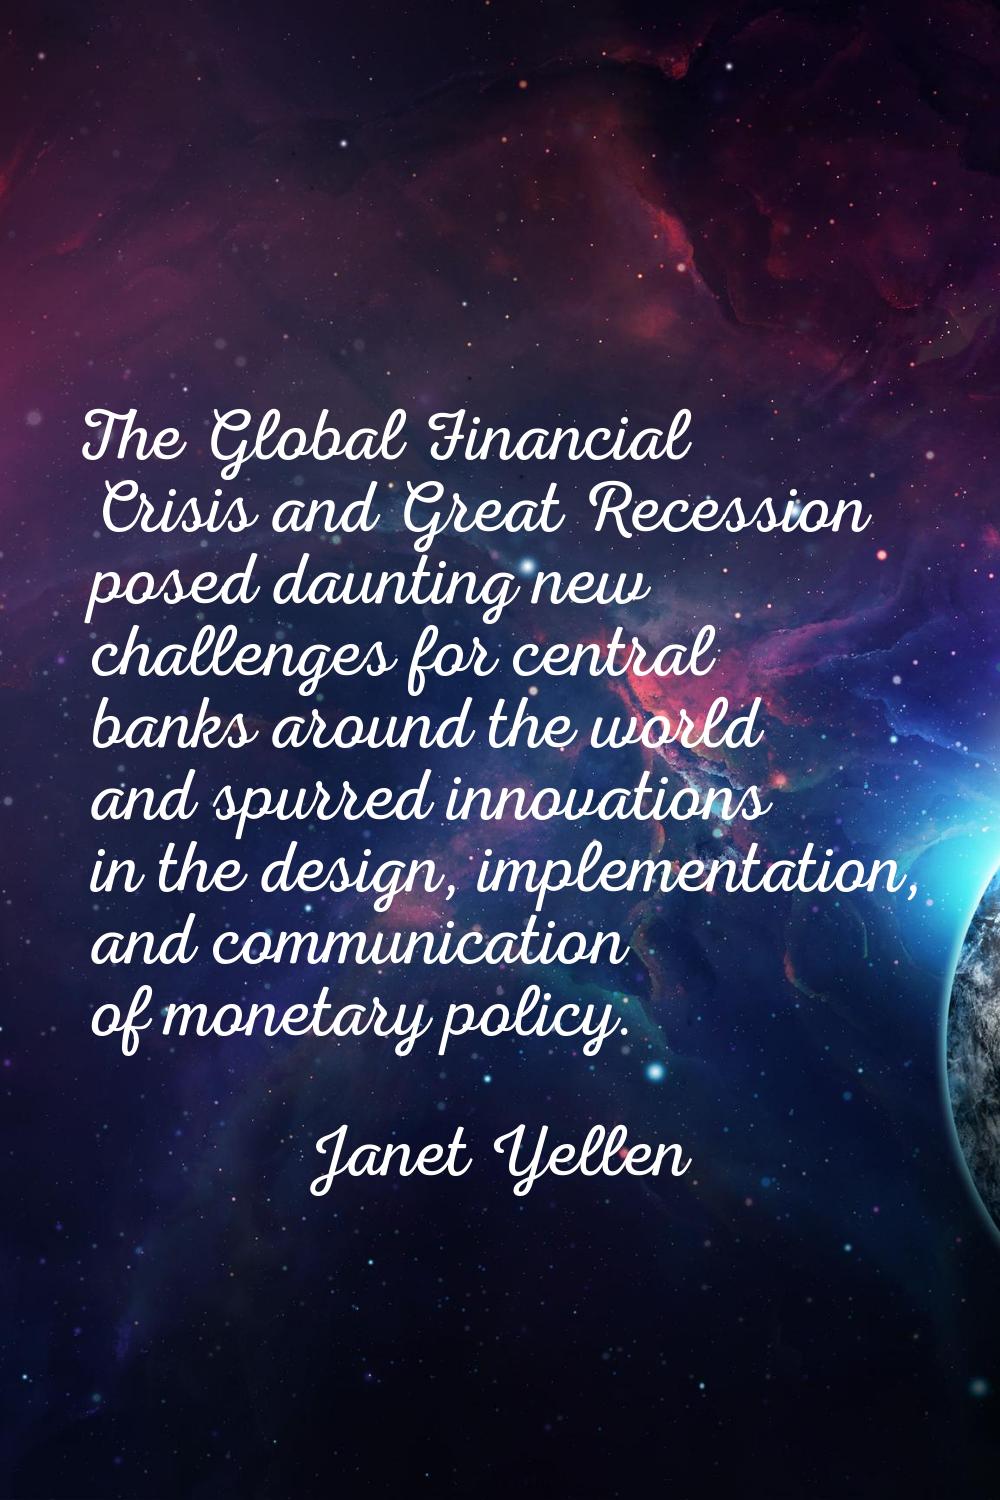 The Global Financial Crisis and Great Recession posed daunting new challenges for central banks aro